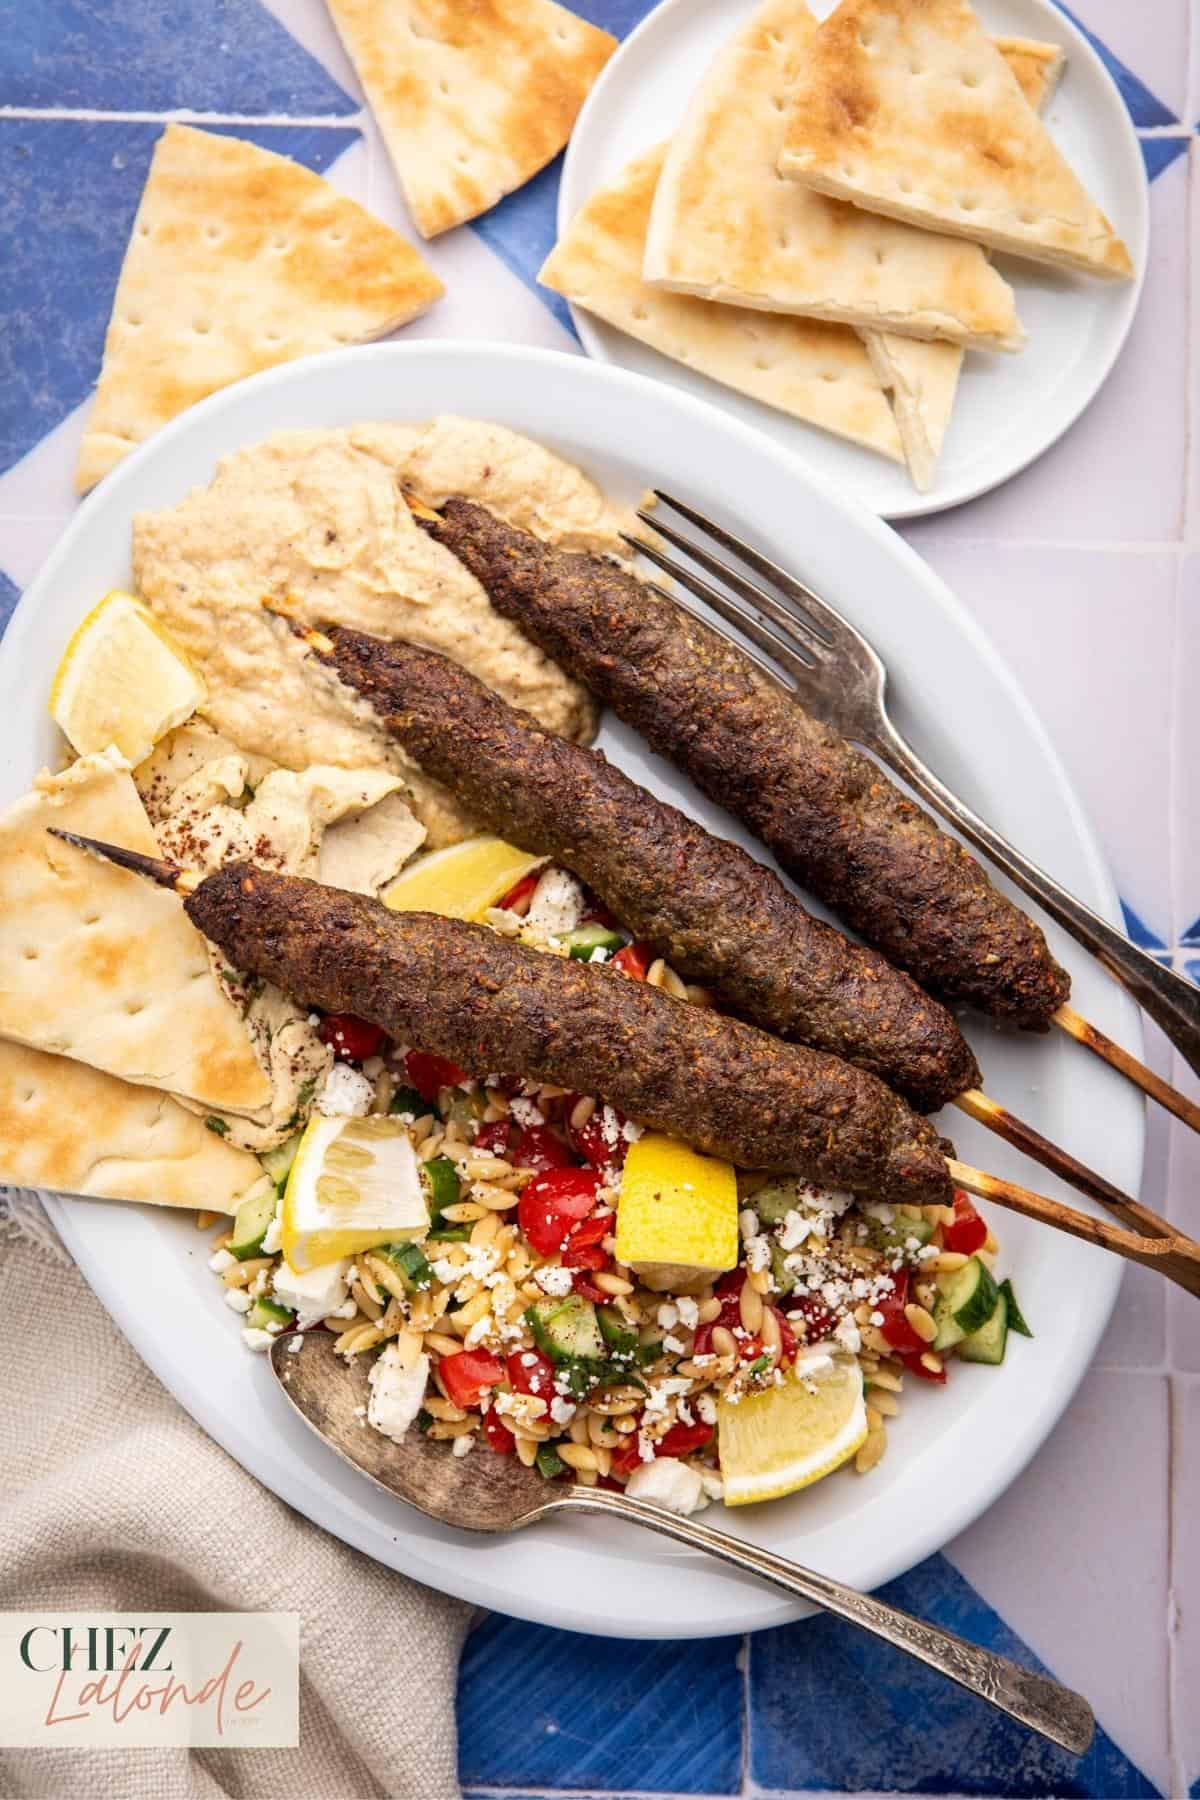 A plate with 3 skewers of Kofta kebabs served with Orzo salad, baba ganoush, hummus, and pita. 